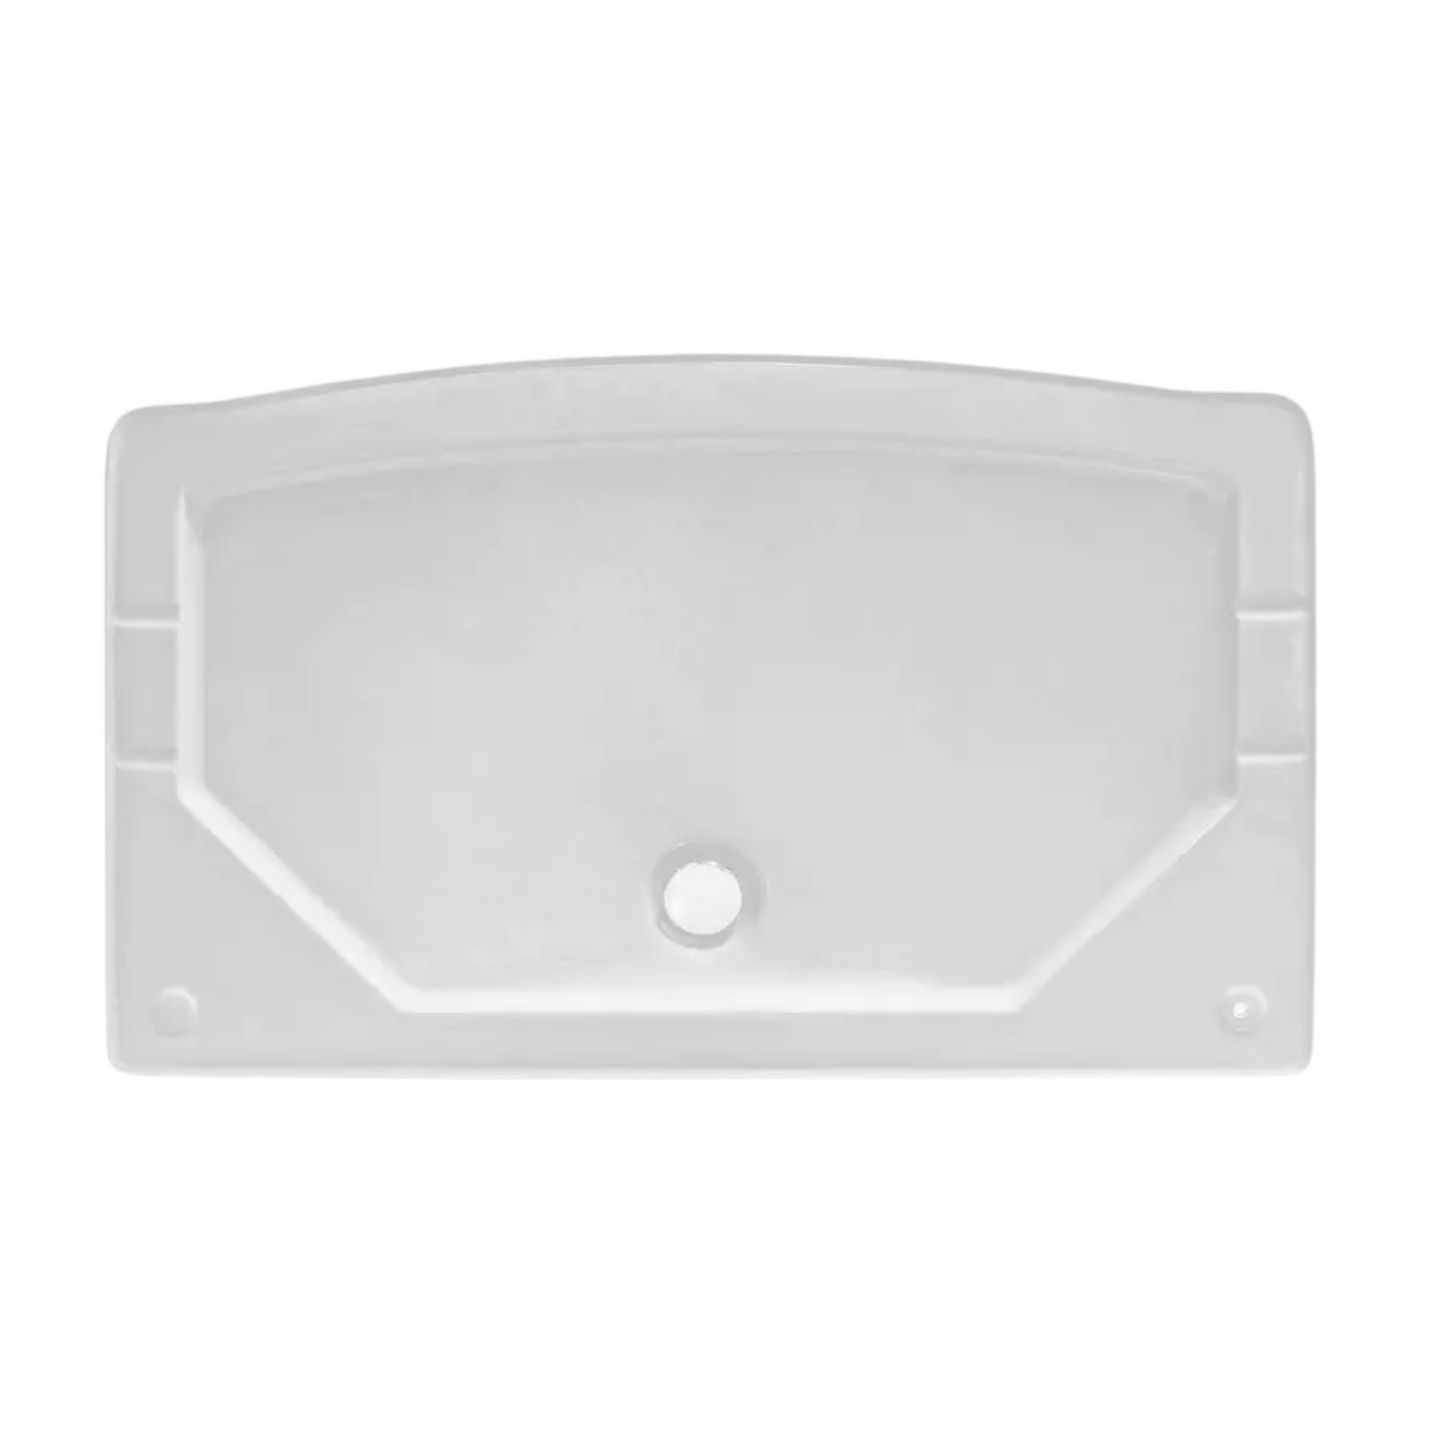 Shower pan for Mesa WS-803A Steam Shower - MesaSteamShowers.com